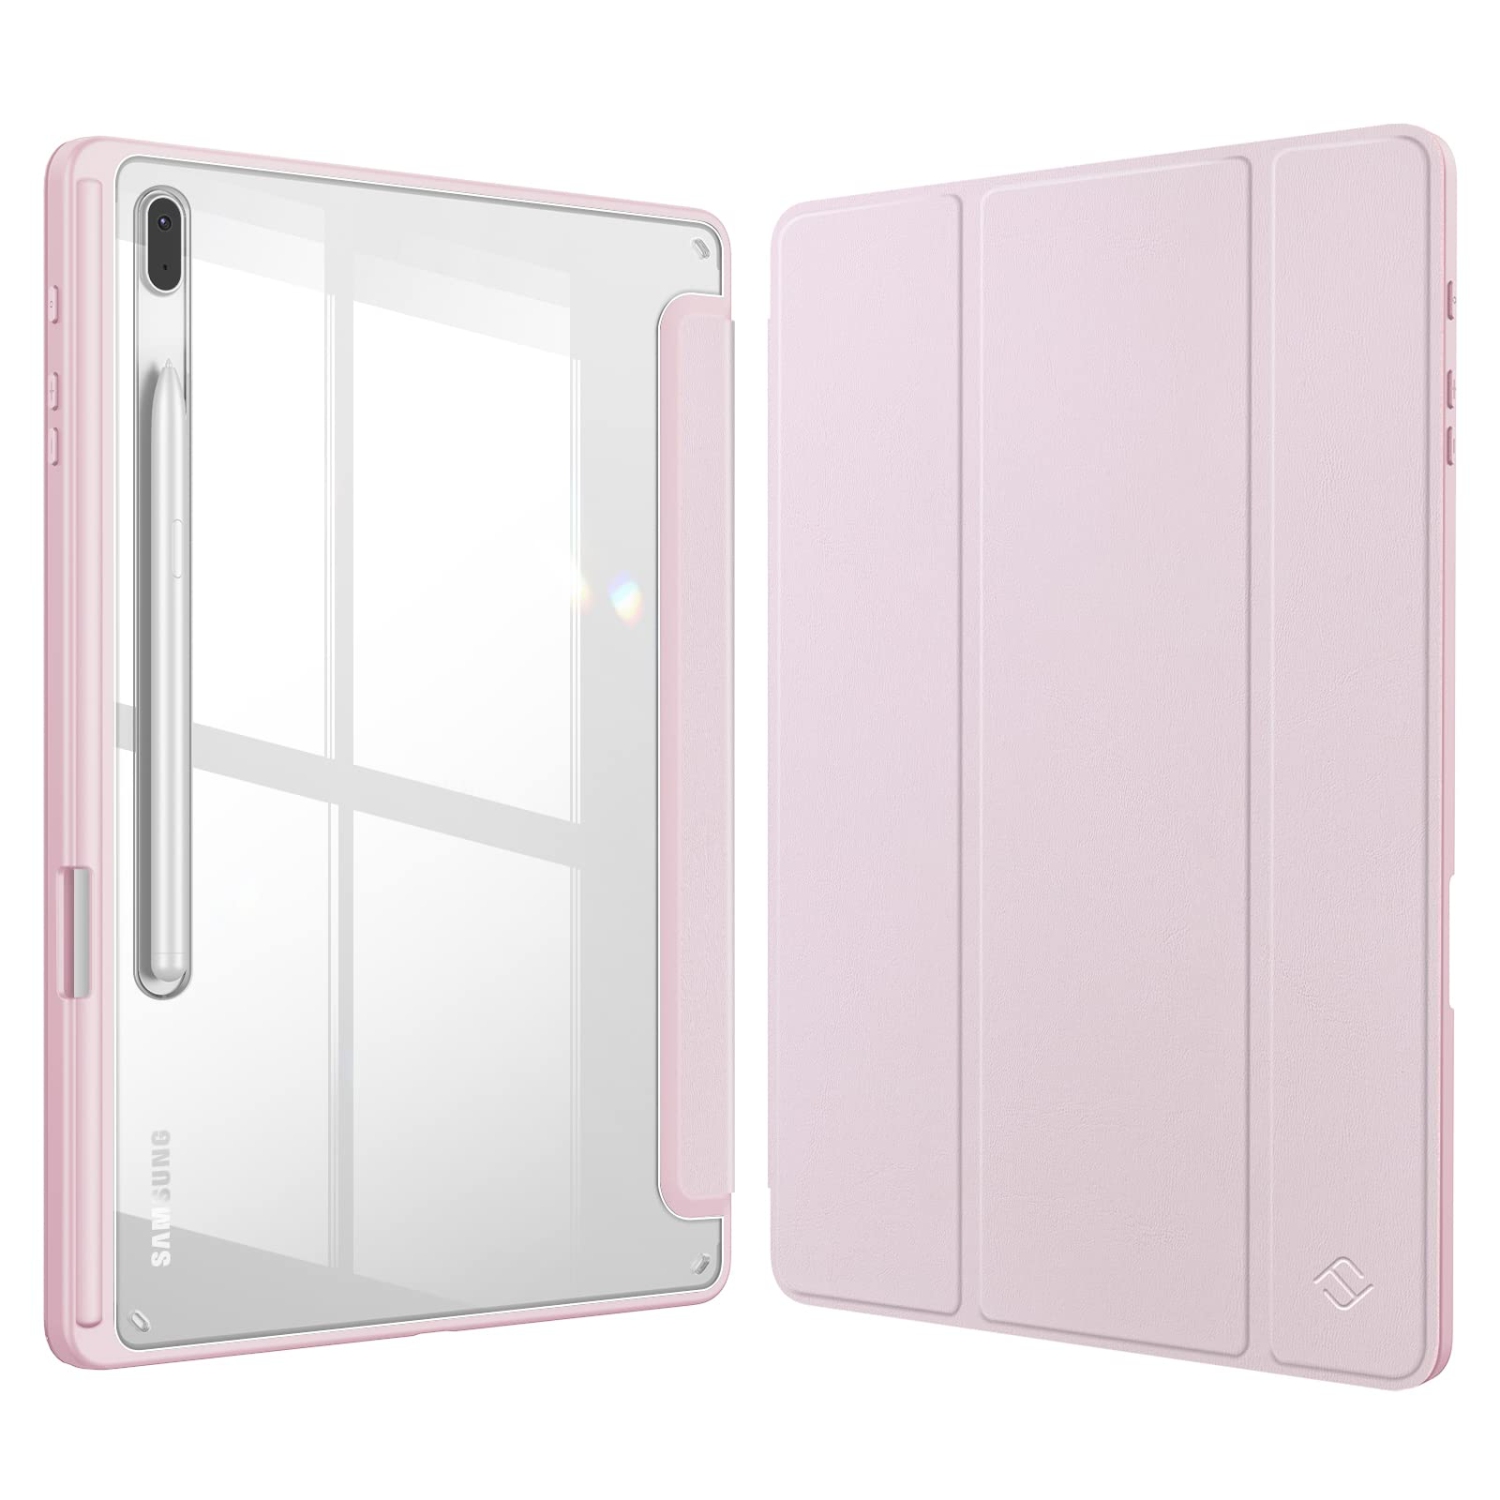 Hybrid Slim Case for Samsung Galaxy Tab S8 Plus 2022/S7 FE 2021/S7 Plus 2020 12.4 inch with S Pen Holder, Shockproof Cover with Clear Transparent Back Shell, Auto Wake/Sleep (Pink)